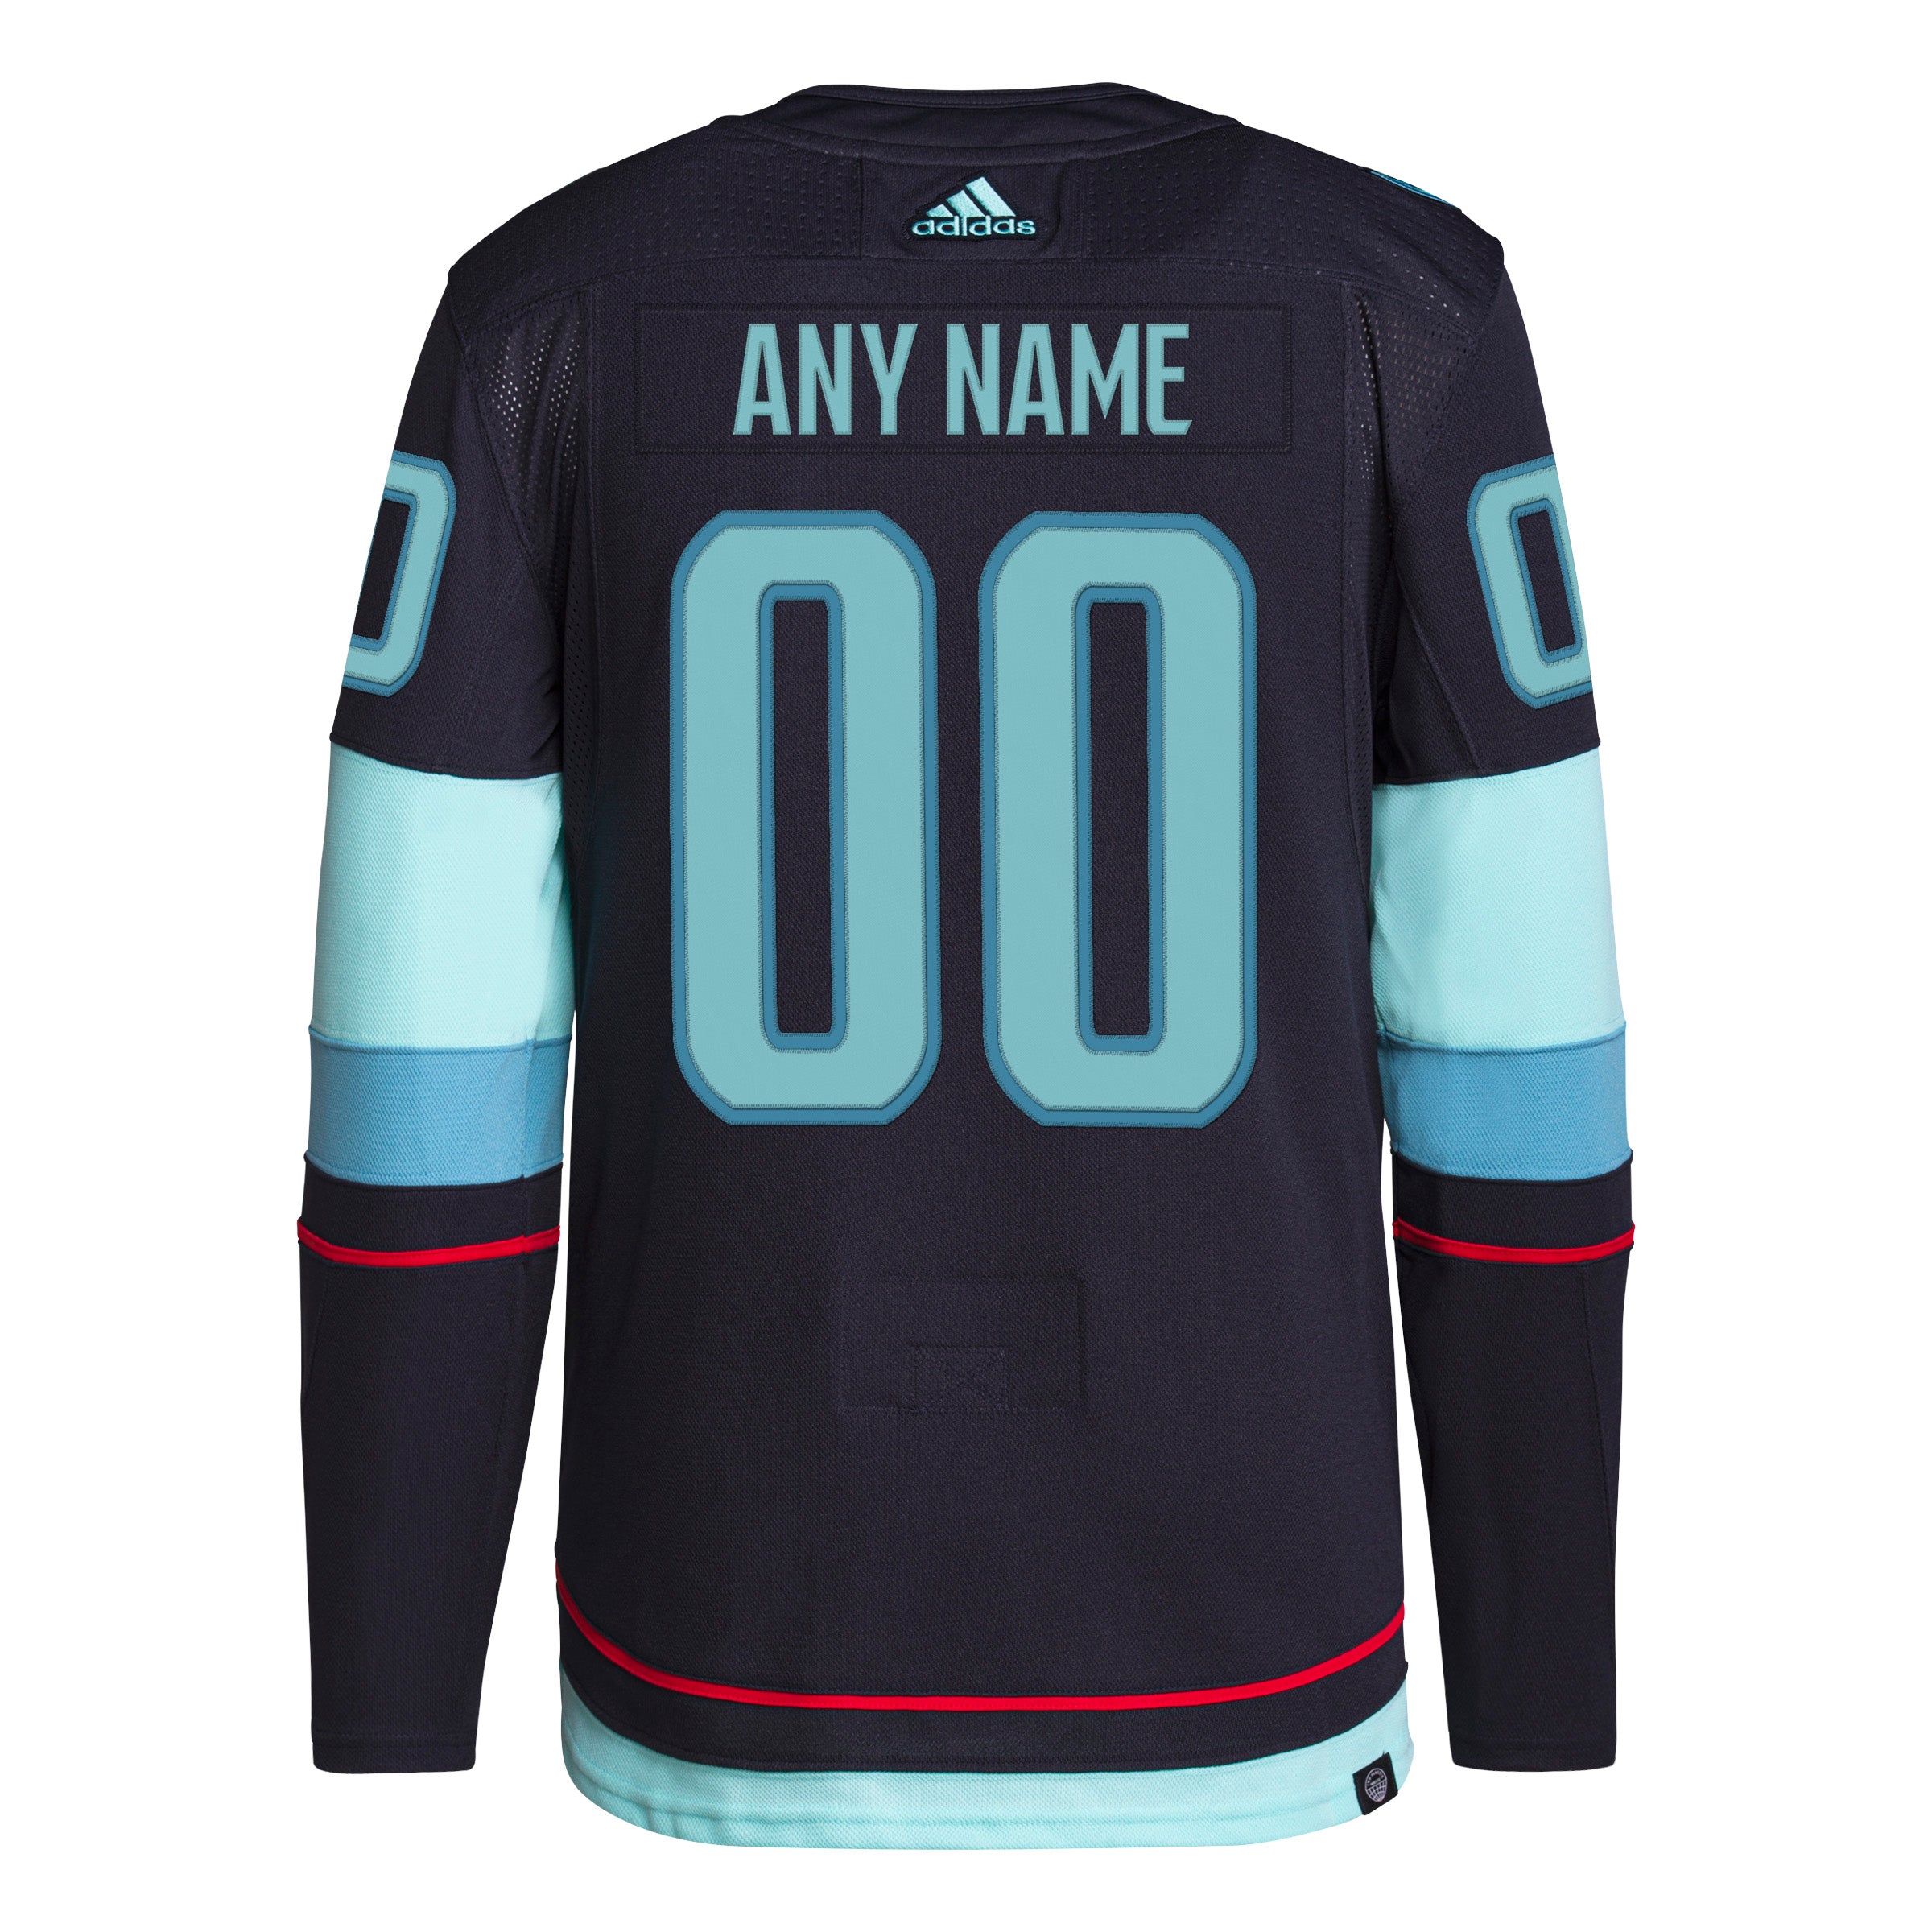 Men's Adidas Sharks Personalized Camo Authentic NHL Jersey